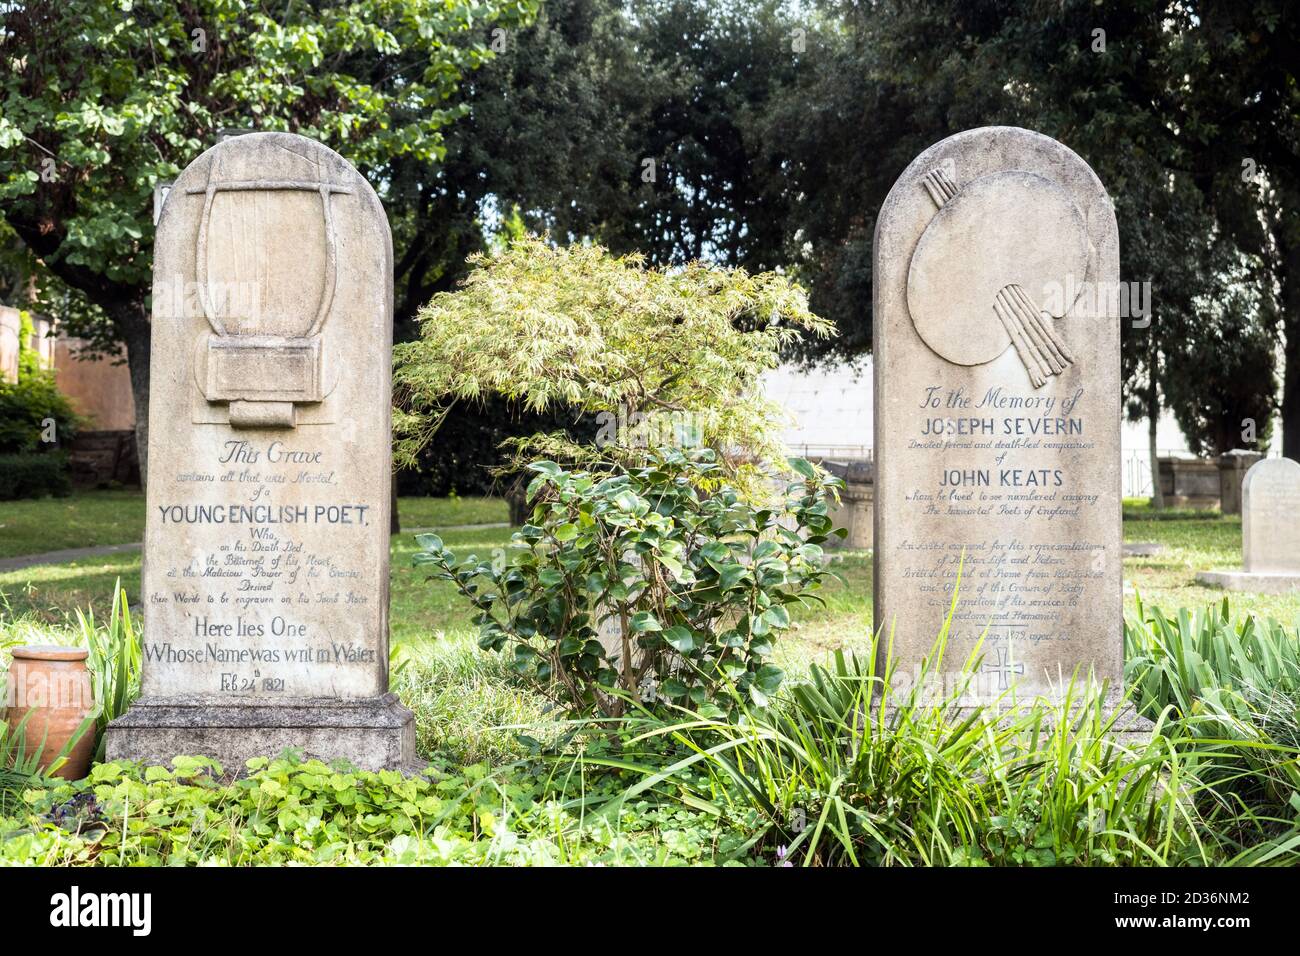 The tomb of John Keats and Joseph Severn in the protestant cemetery of Rome- Rome, Italy Stock Photo